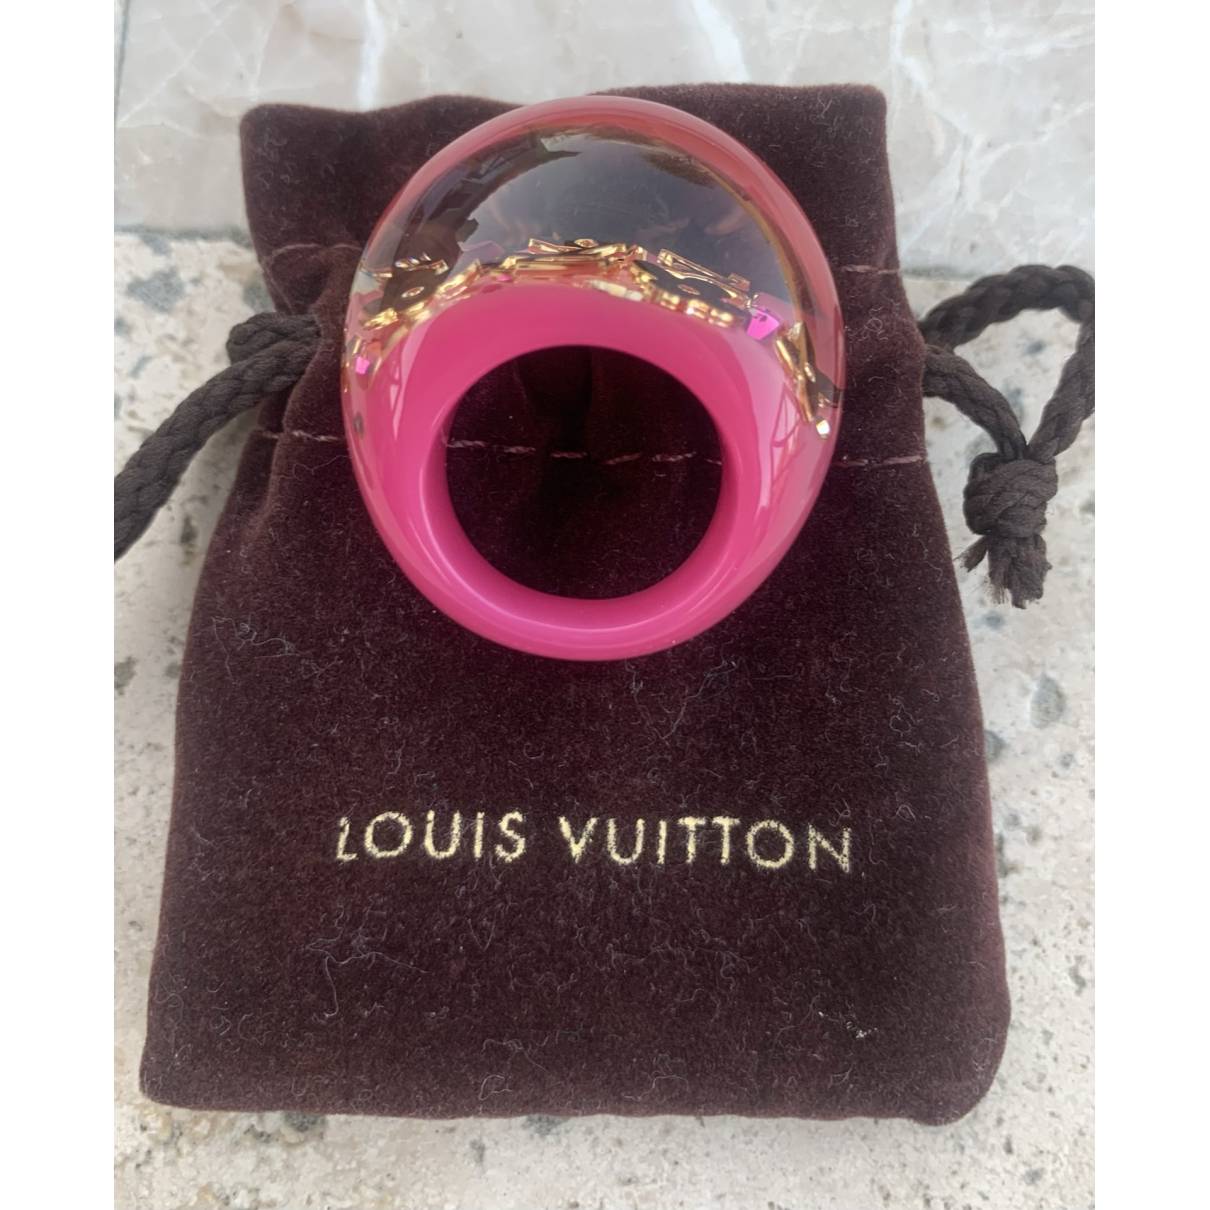 Louis Vuitton - Authenticated Inclusion Ring - Ceramic Pink for Women, Good Condition